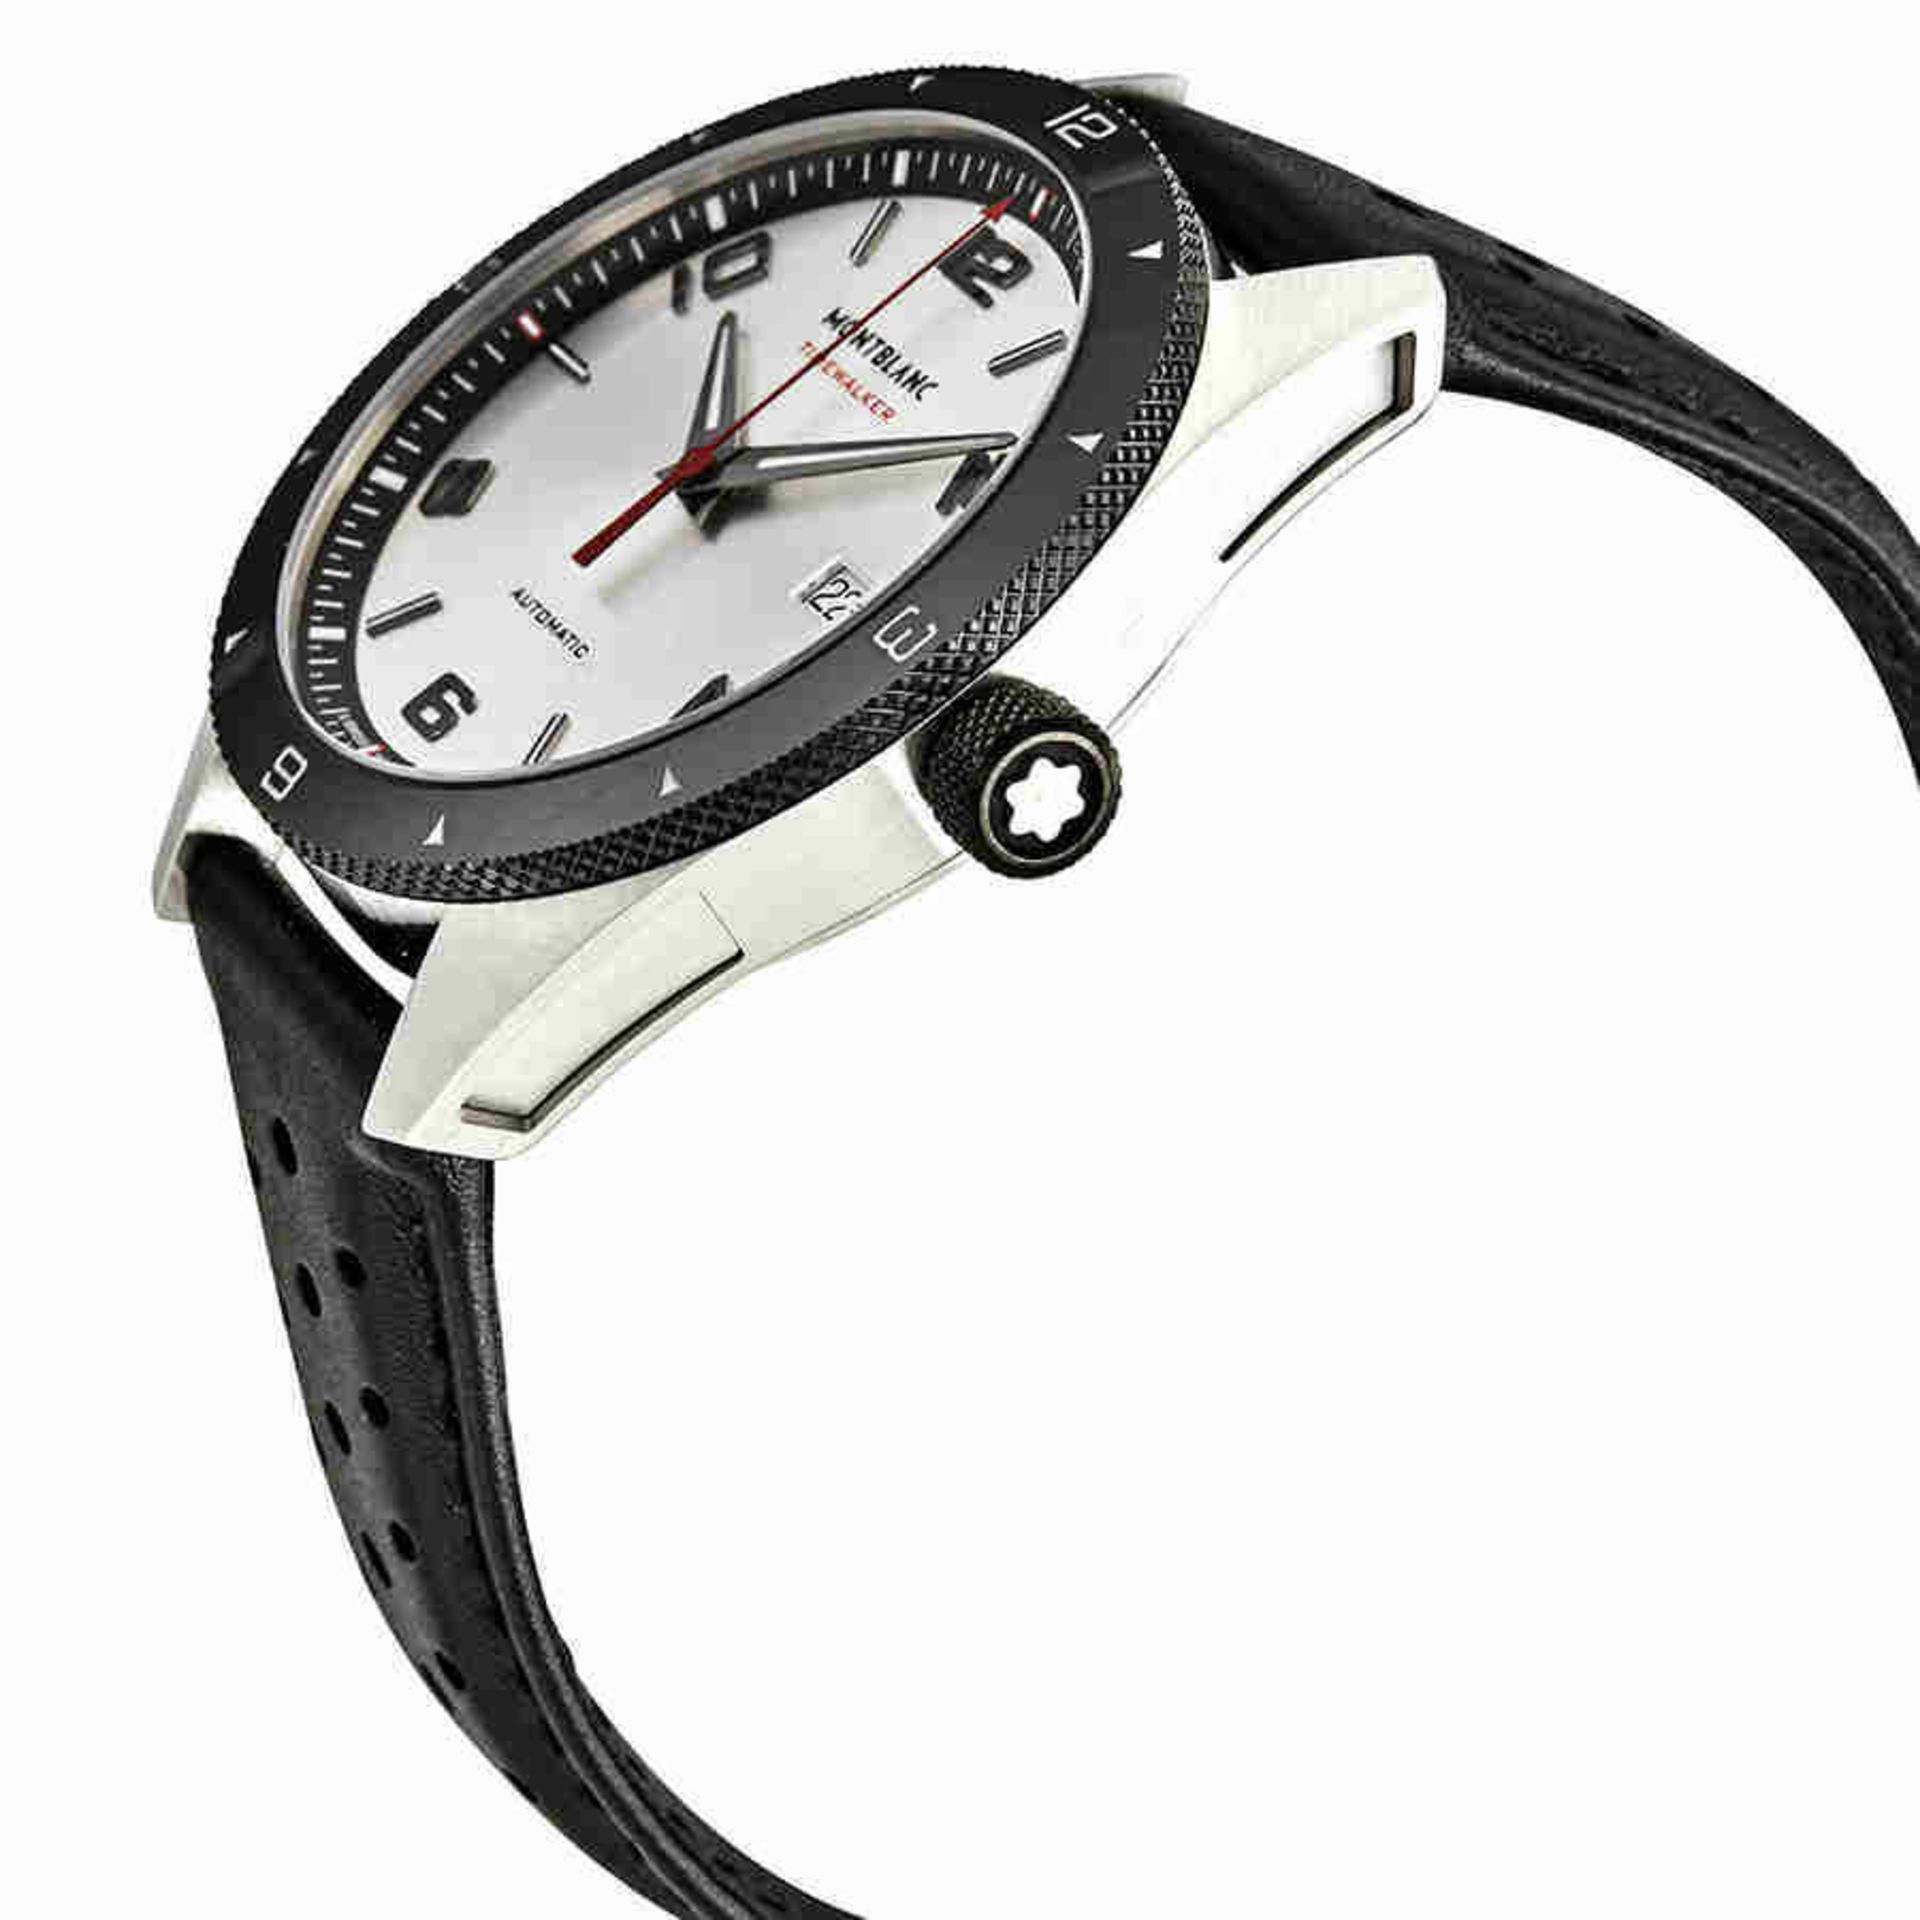 BRAND NEW MONTBLANC Men's TimeWalker Calfskin Leather Silver Dial Watch (542) RRP £2900 - Image 3 of 3